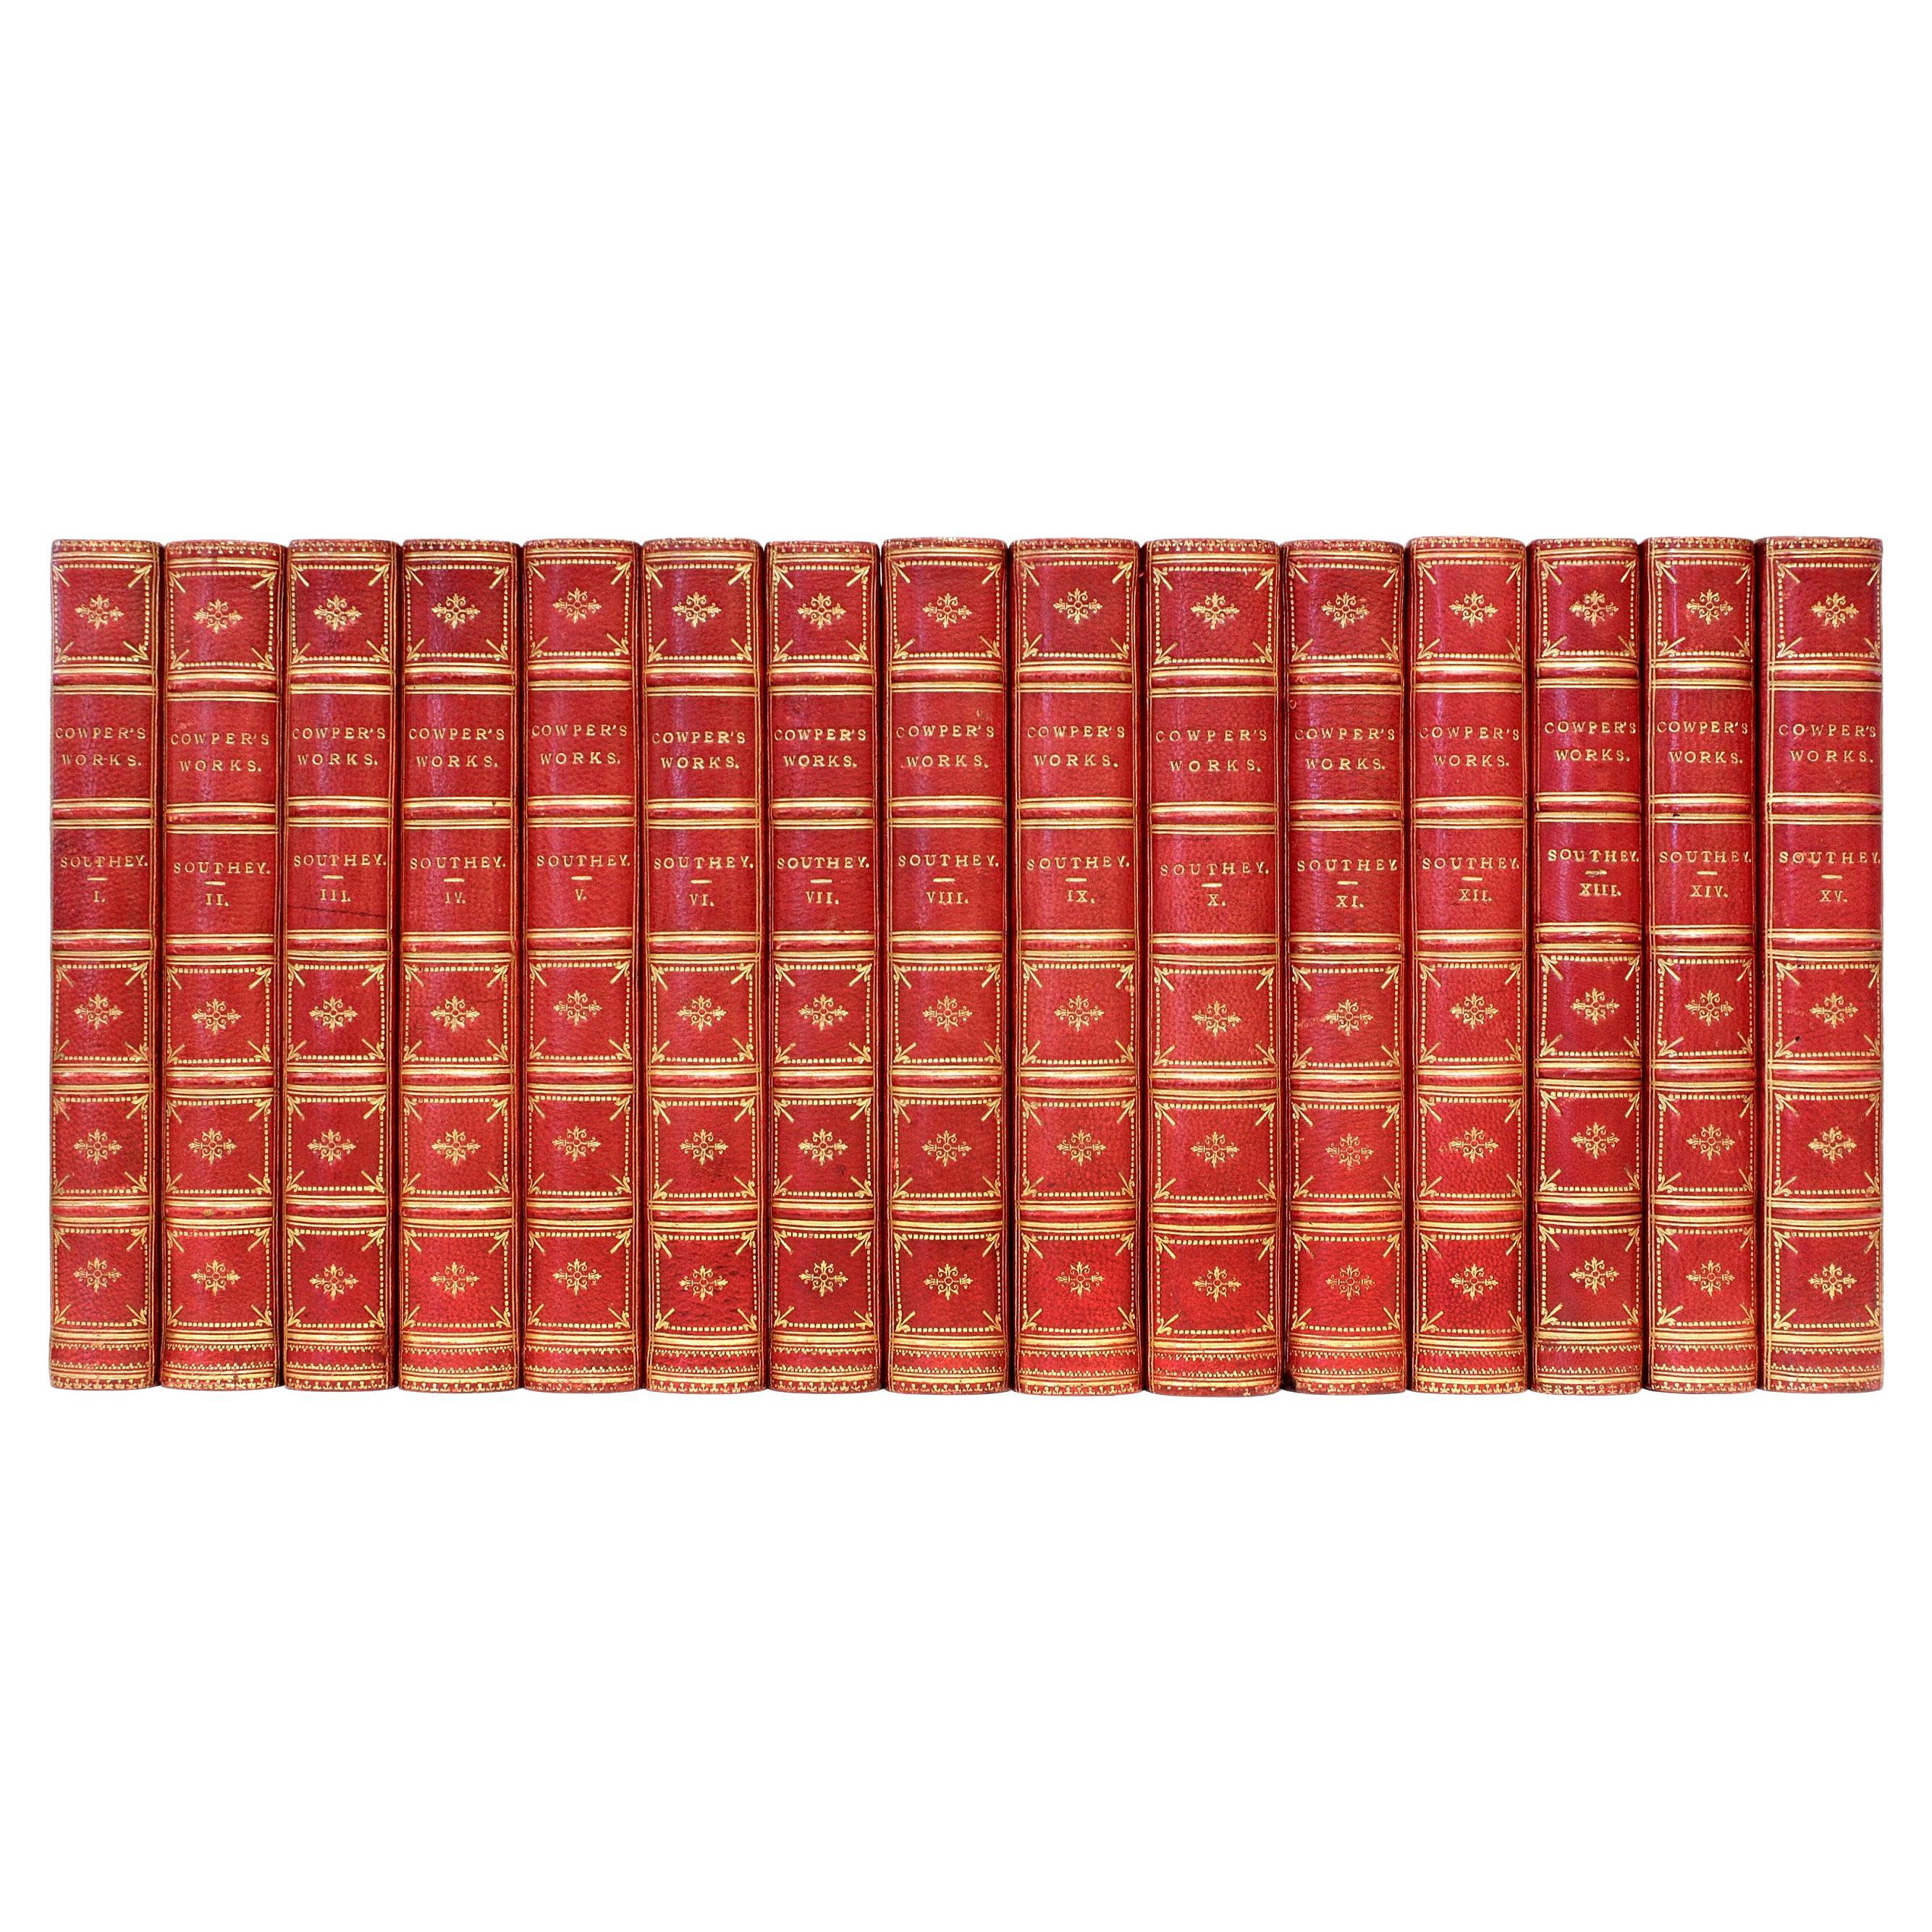 The Works of William Cowper. 15 Bände, 1835, IN A FINE LEATHER BINDING!